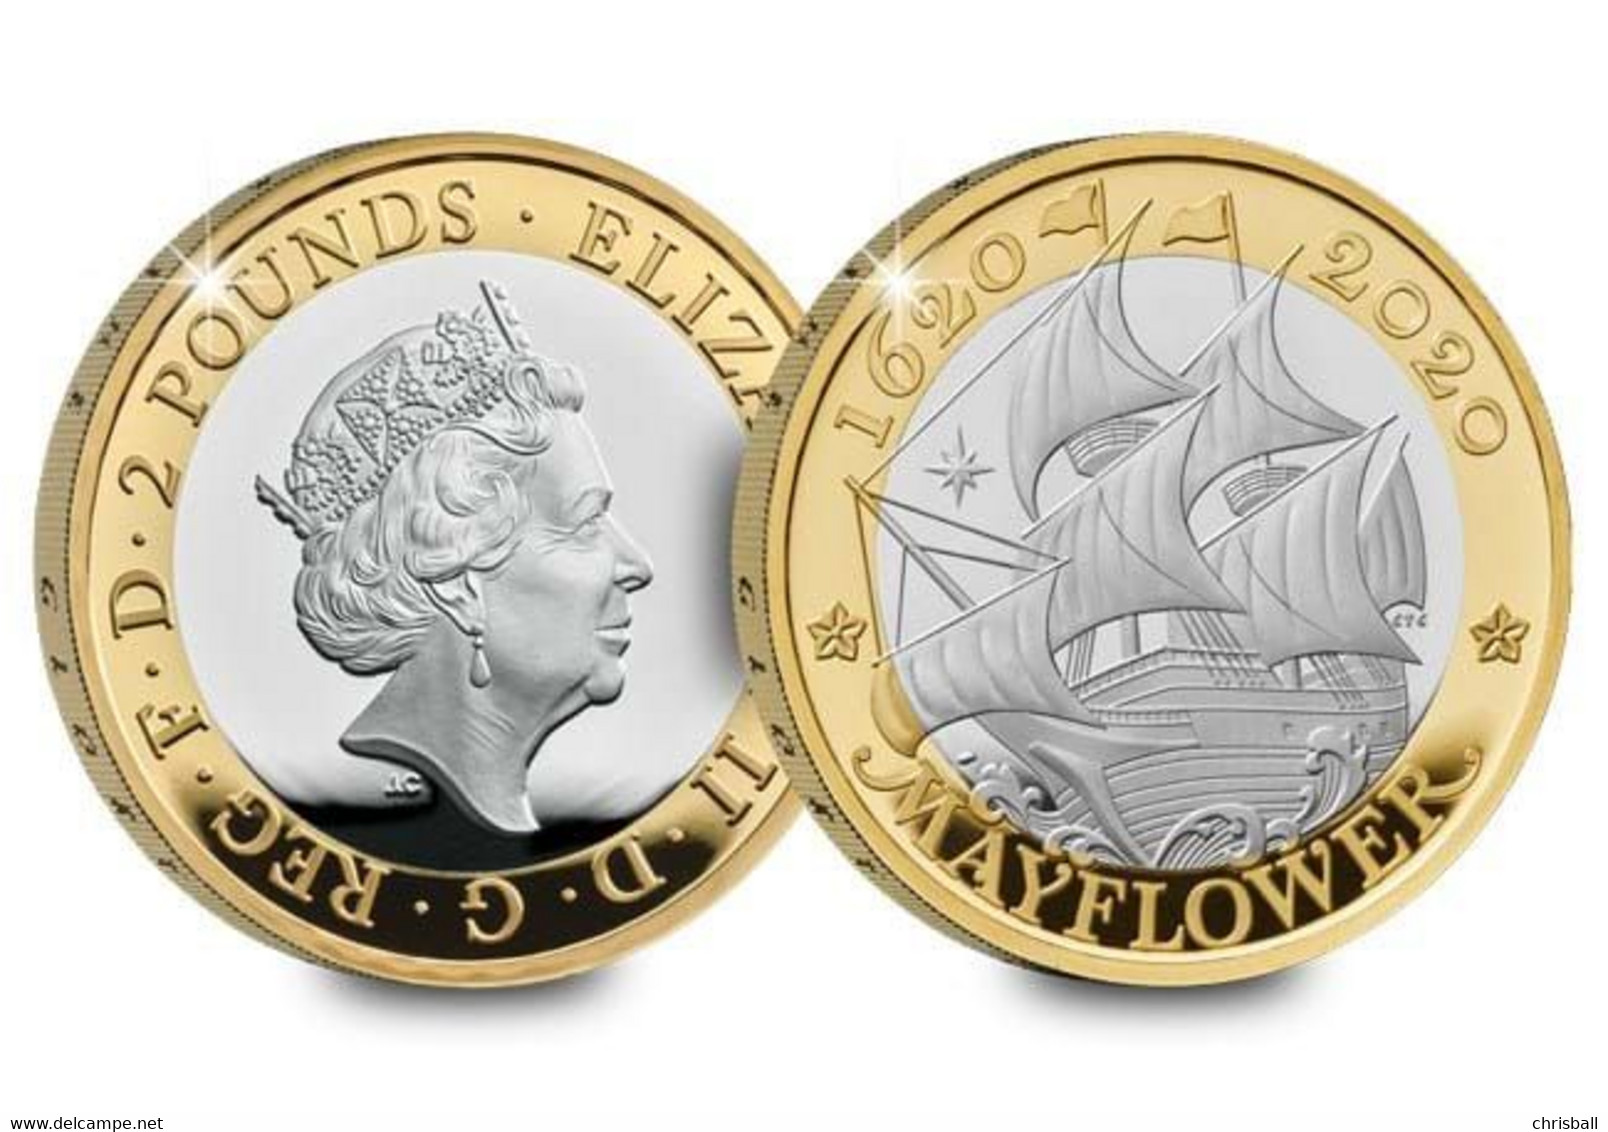 Great Britain UK  Mayflower £2 Two Pound Coin - Silver Proof - Mint Sets & Proof Sets